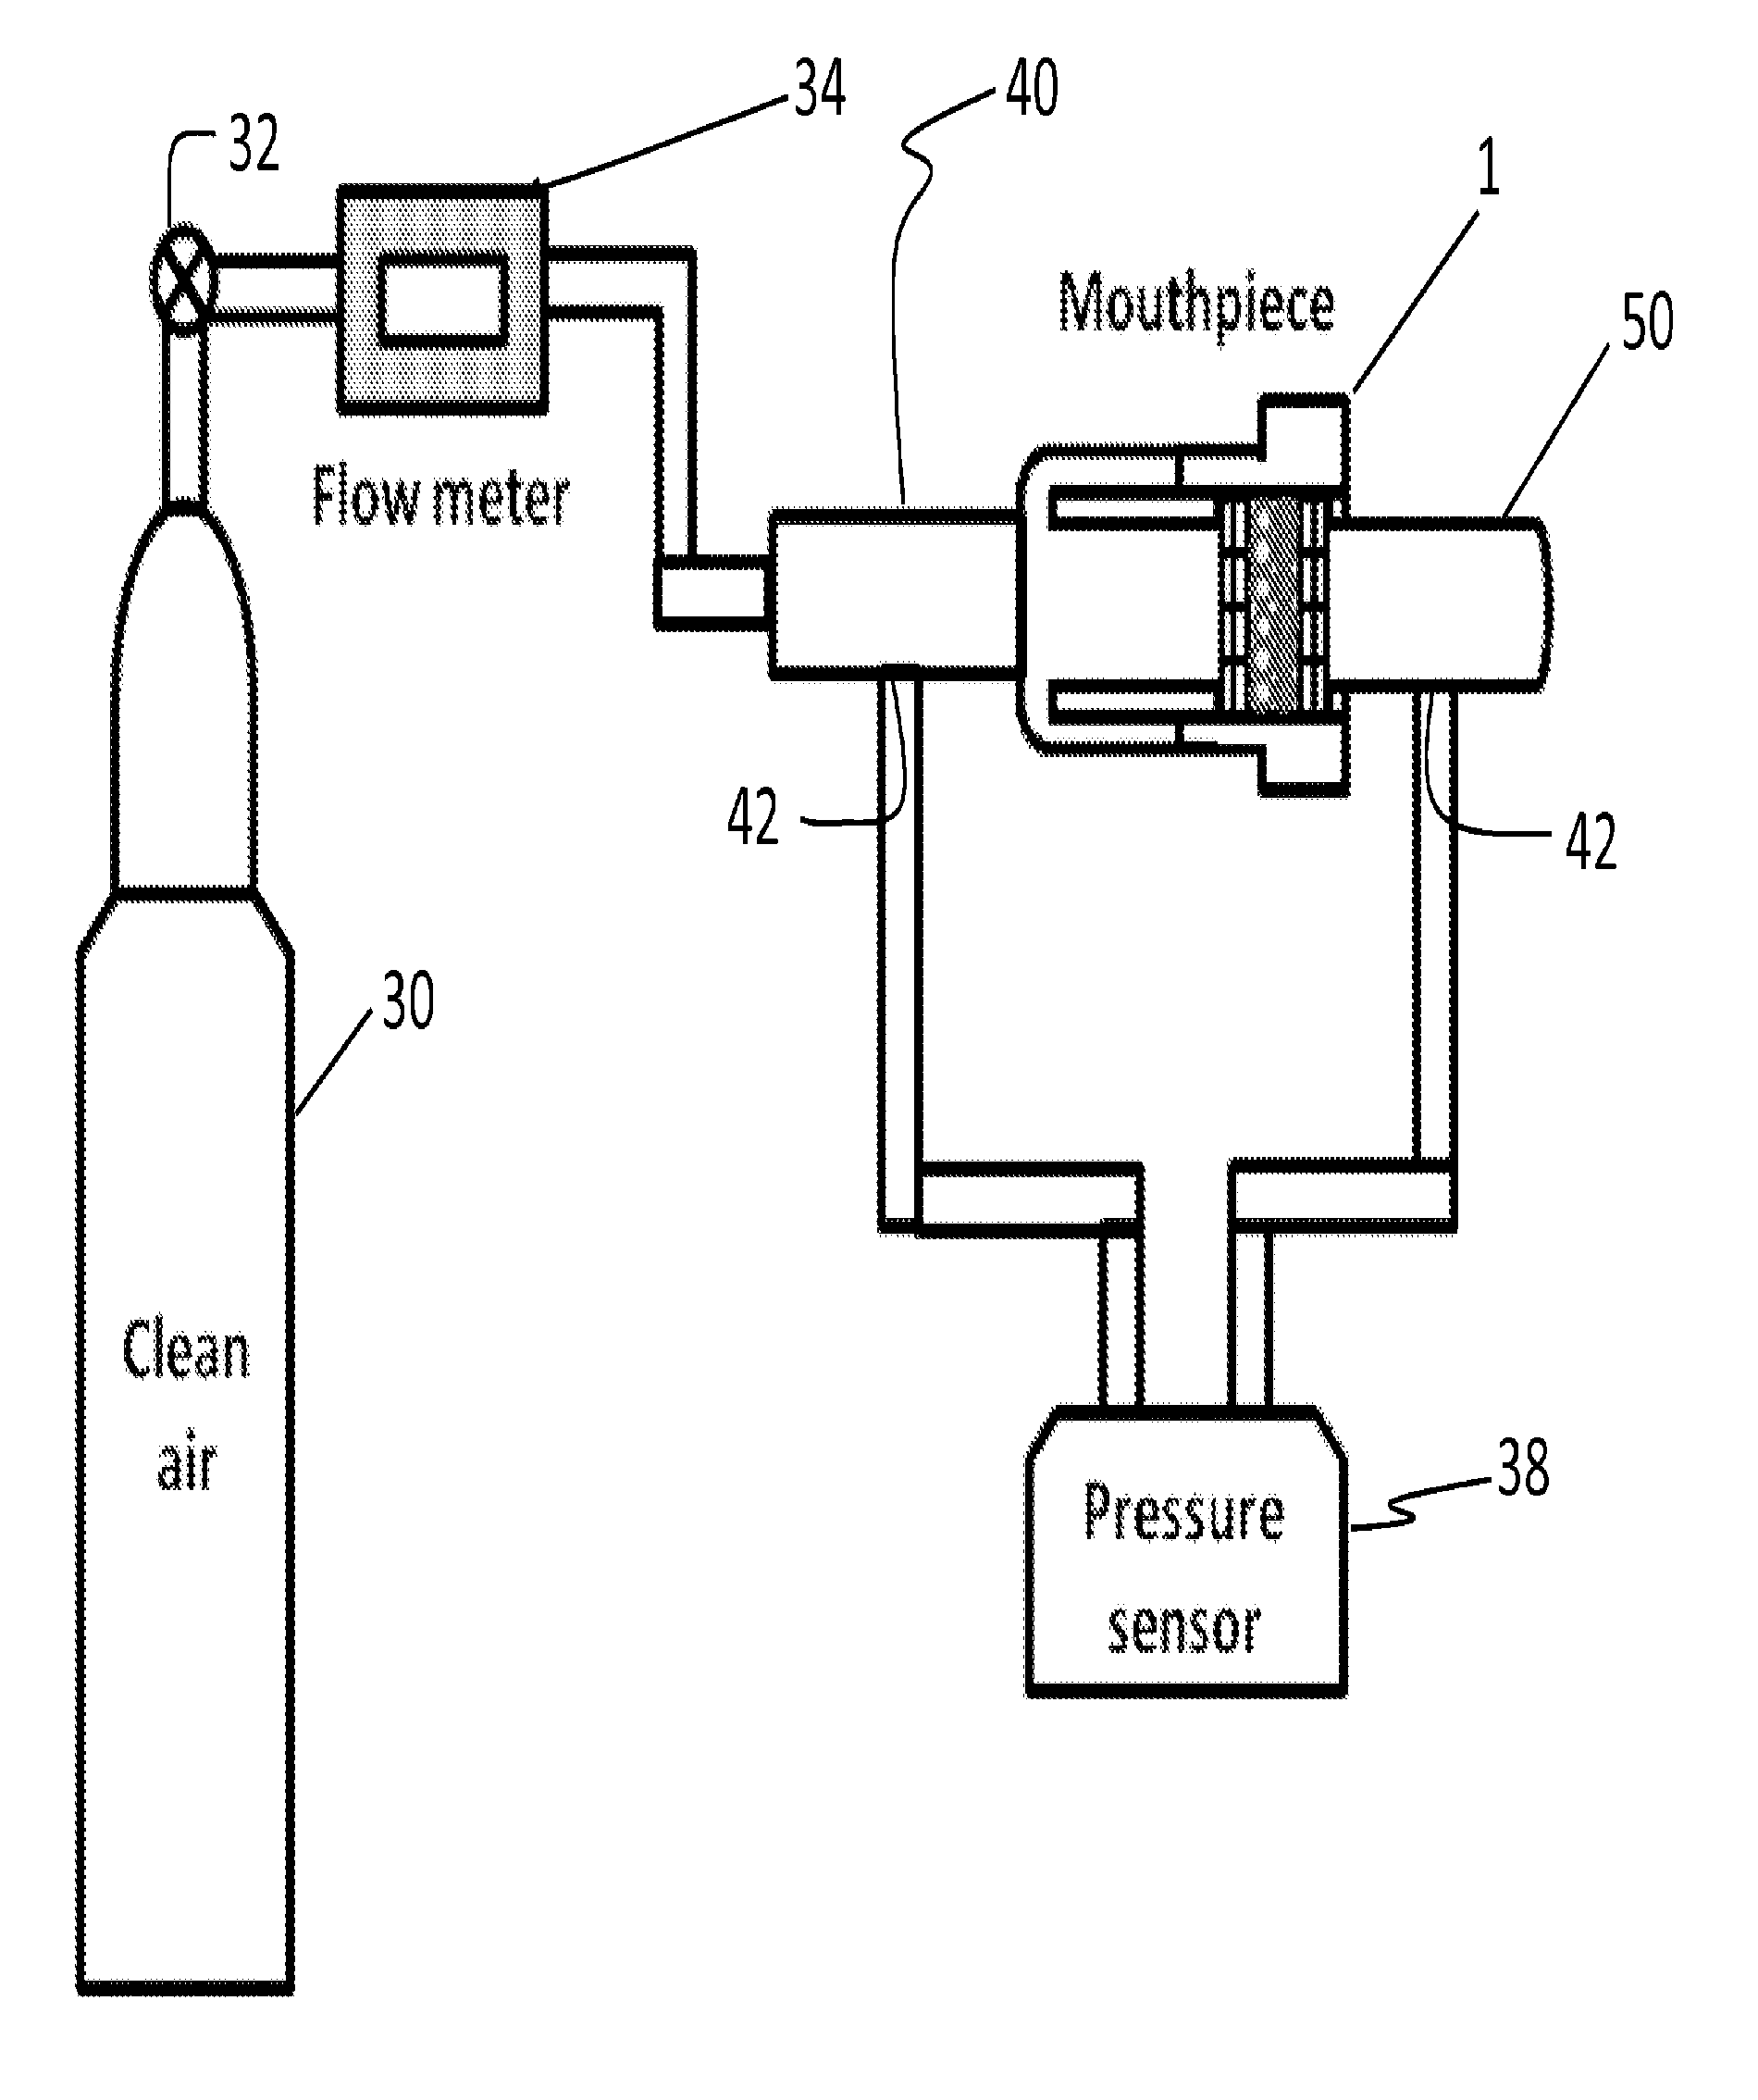 Mouthpiece for accurate detection of exhaled no